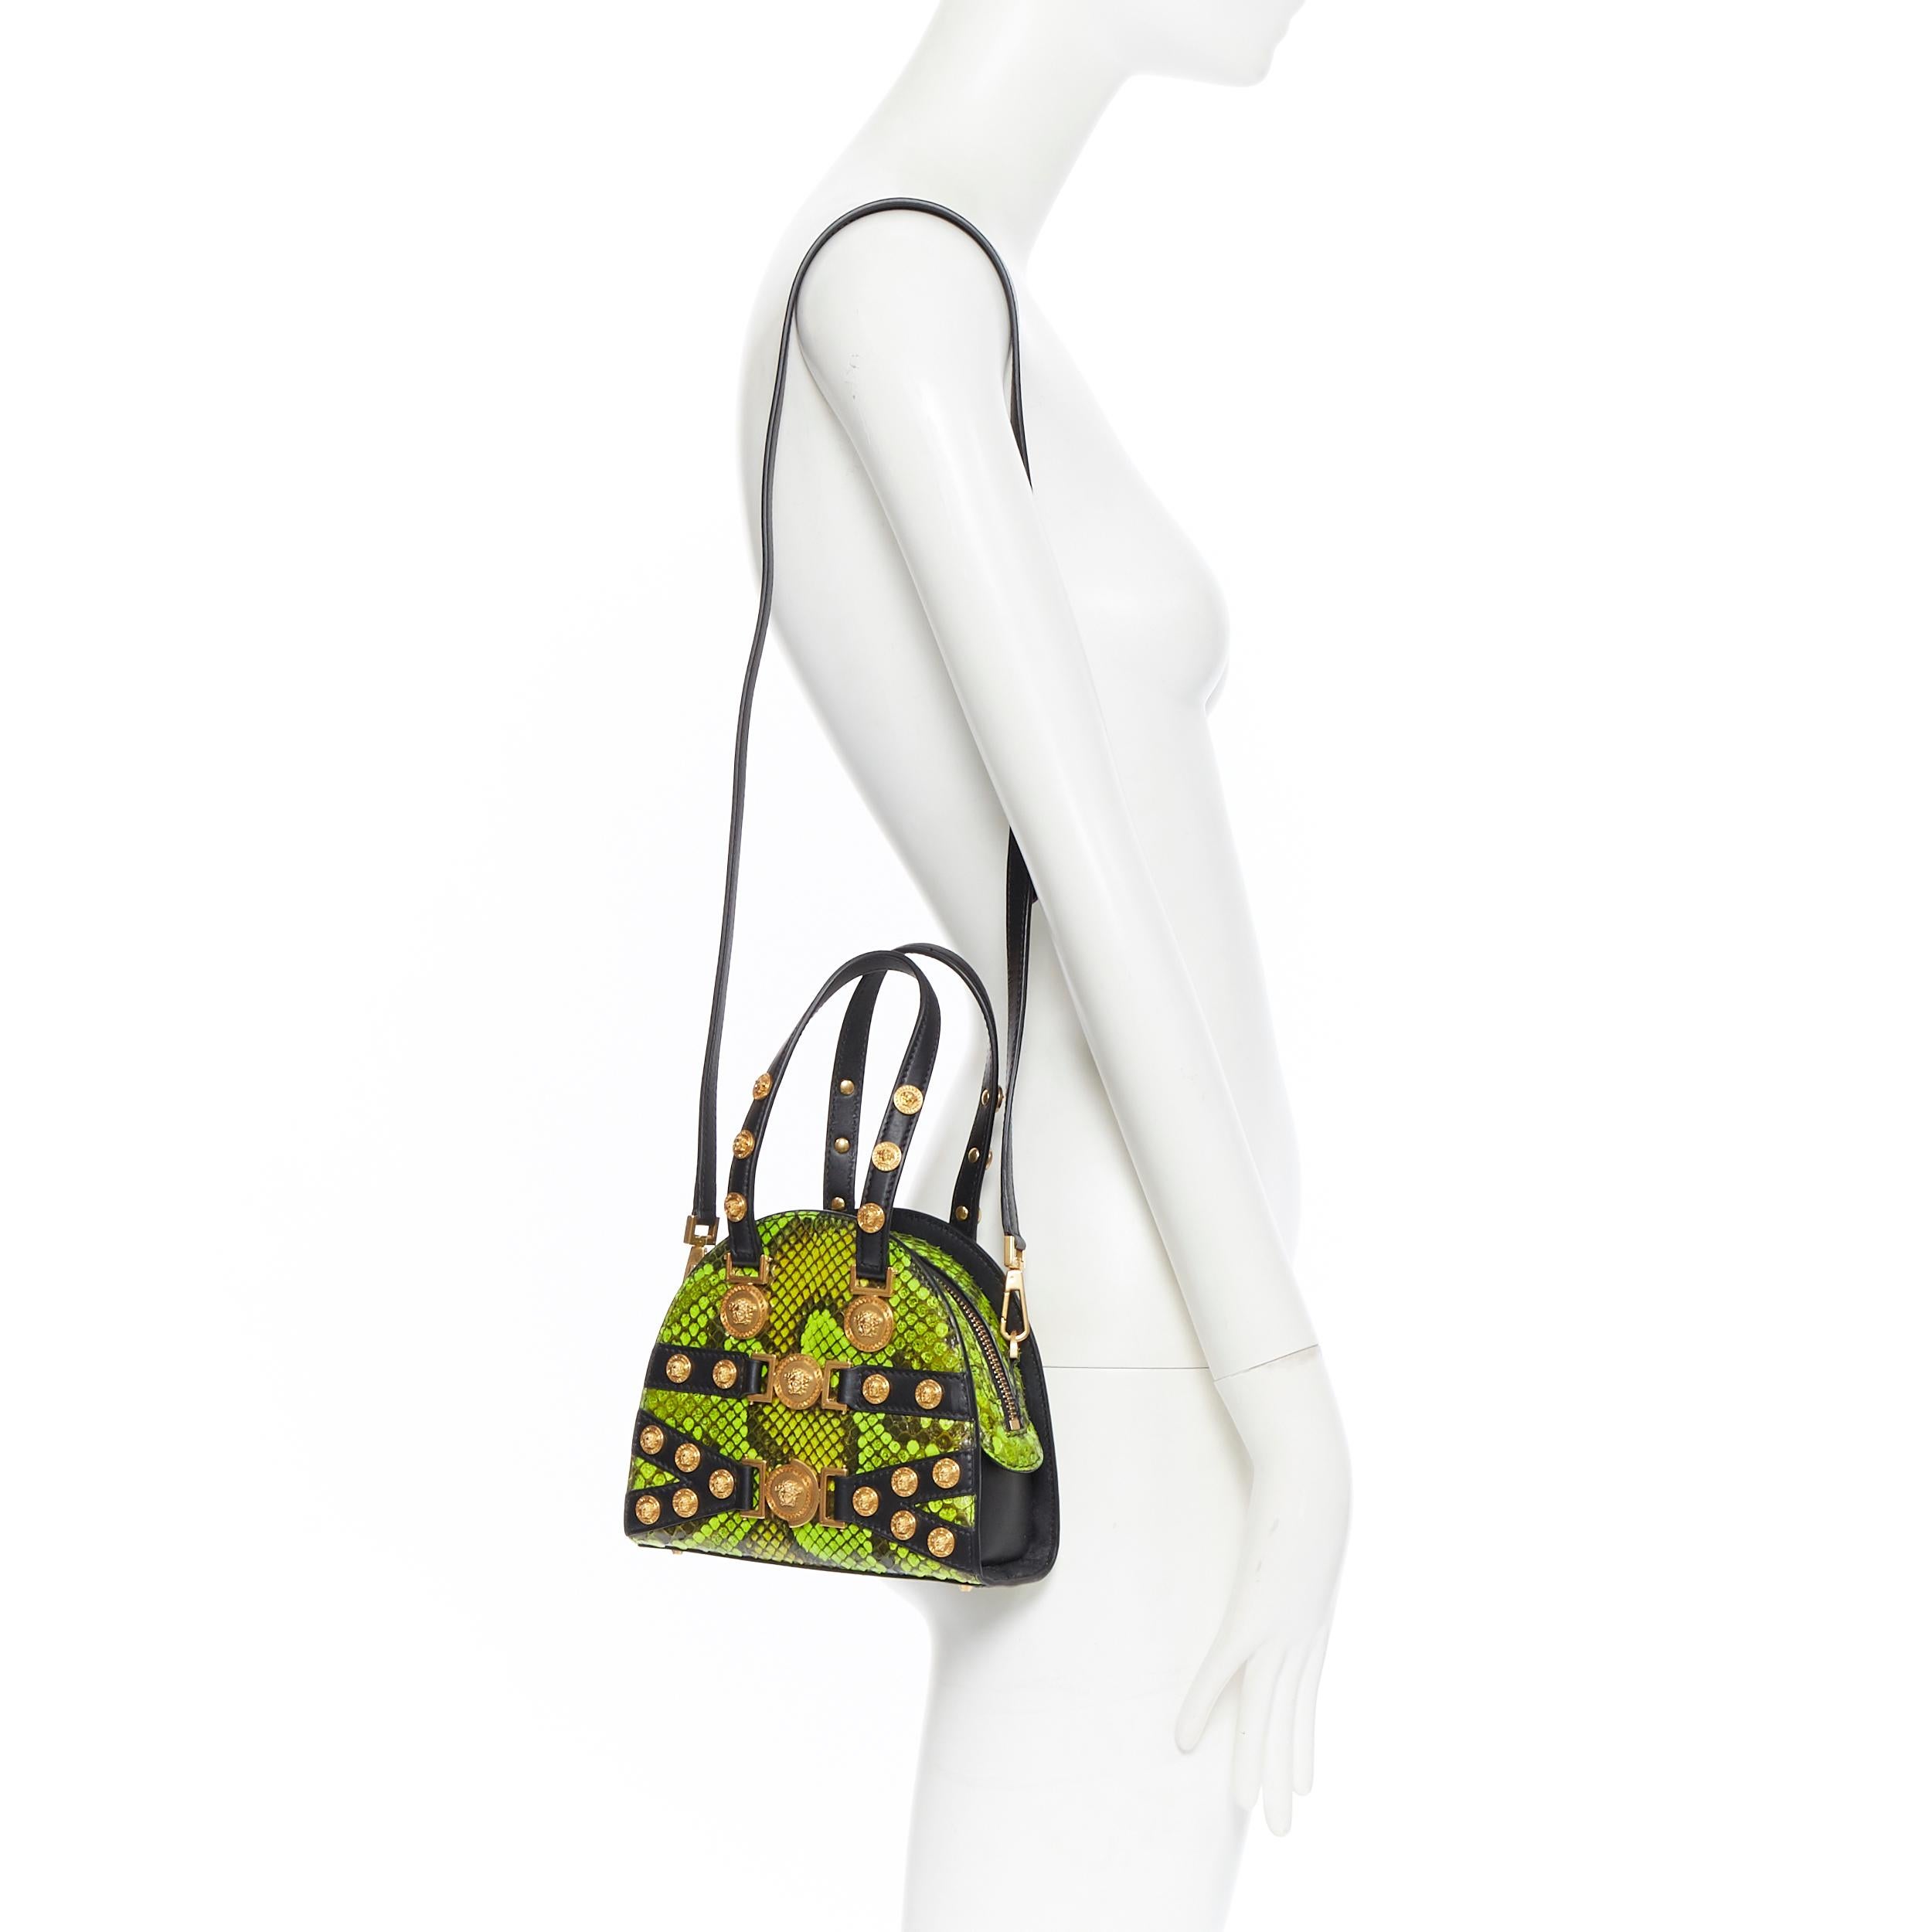 new VERSACE Tribute green scaled leather Medusa stud small bowling shoulder bag
Brand: Versace
Designer: Donatella Versace
Collection: Spring Summer 2018
Model Name / Style: Bowling shoulder bag
Material: Leather
Color: Green
Pattern: Solid
Closure: